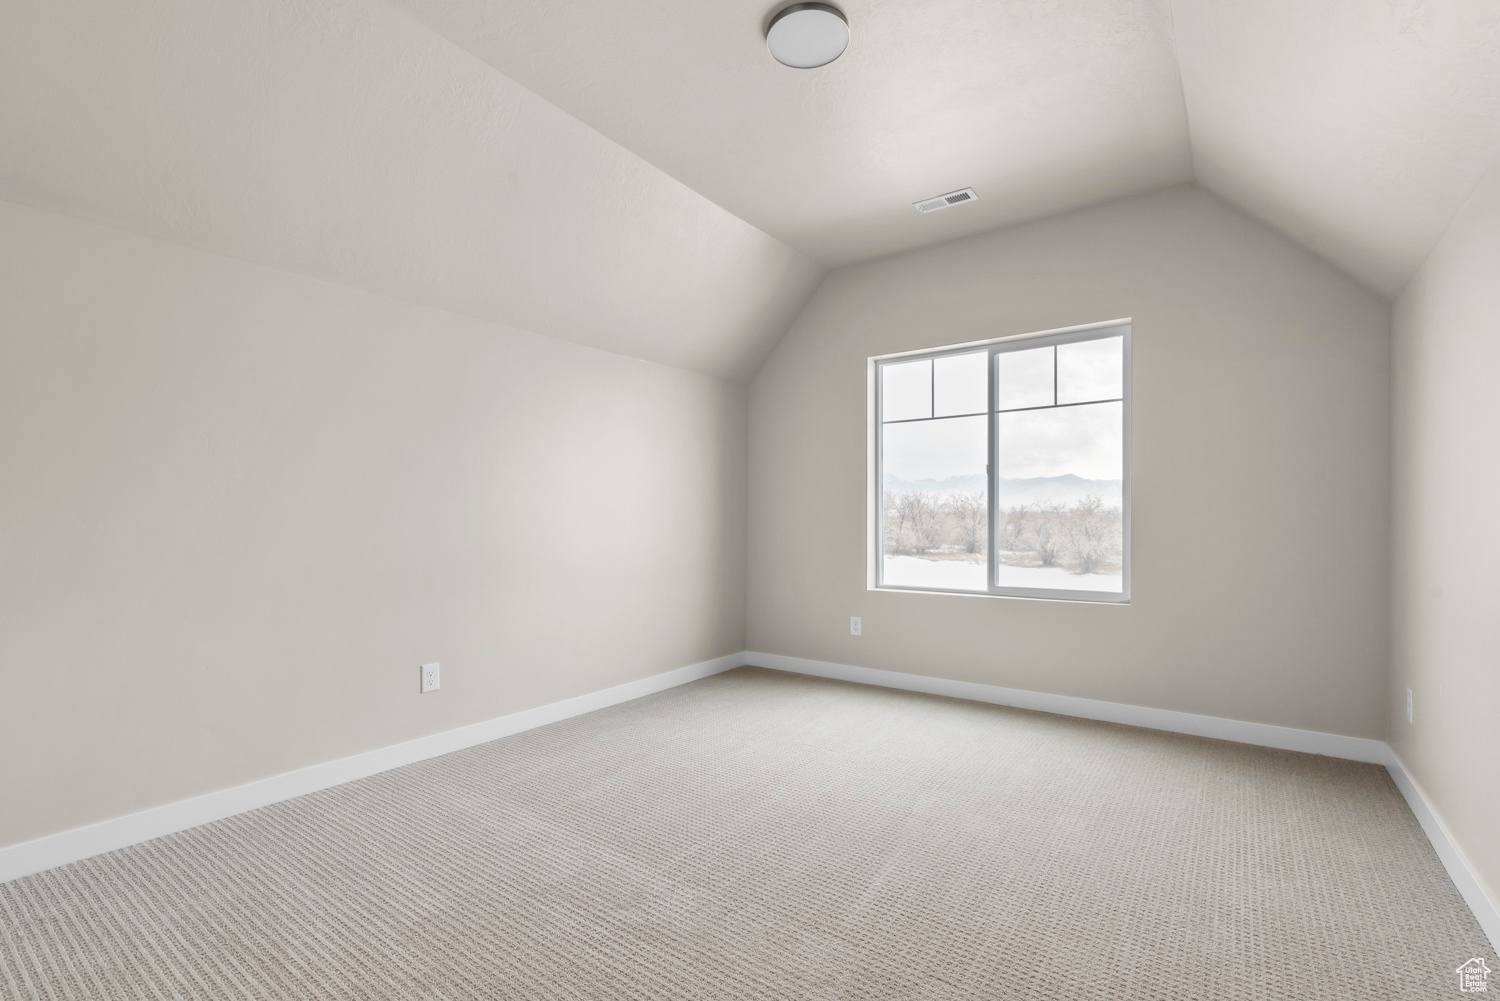 Additional living space featuring lofted ceiling and light colored carpet